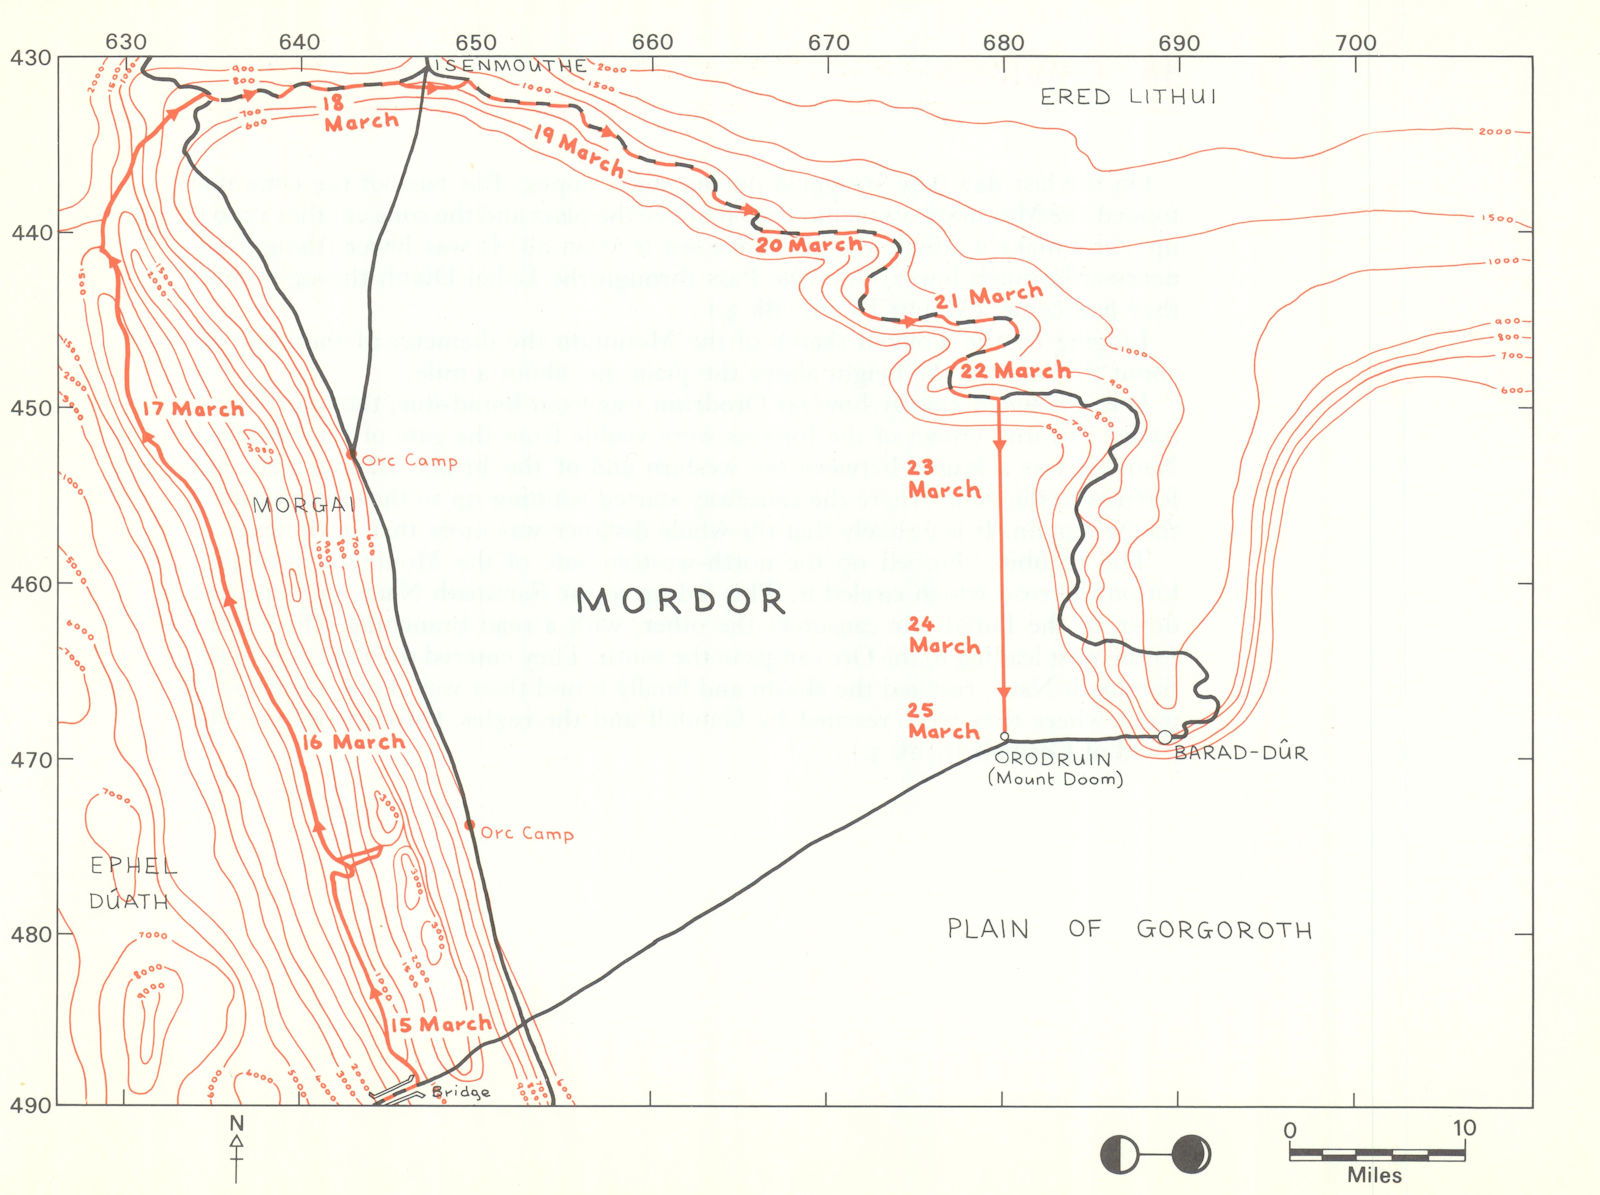 MIDDLE-EARTH Gorgoroth & Mount Doom. Frodo's route. TOLKIEN/STRACHEY 1981 map